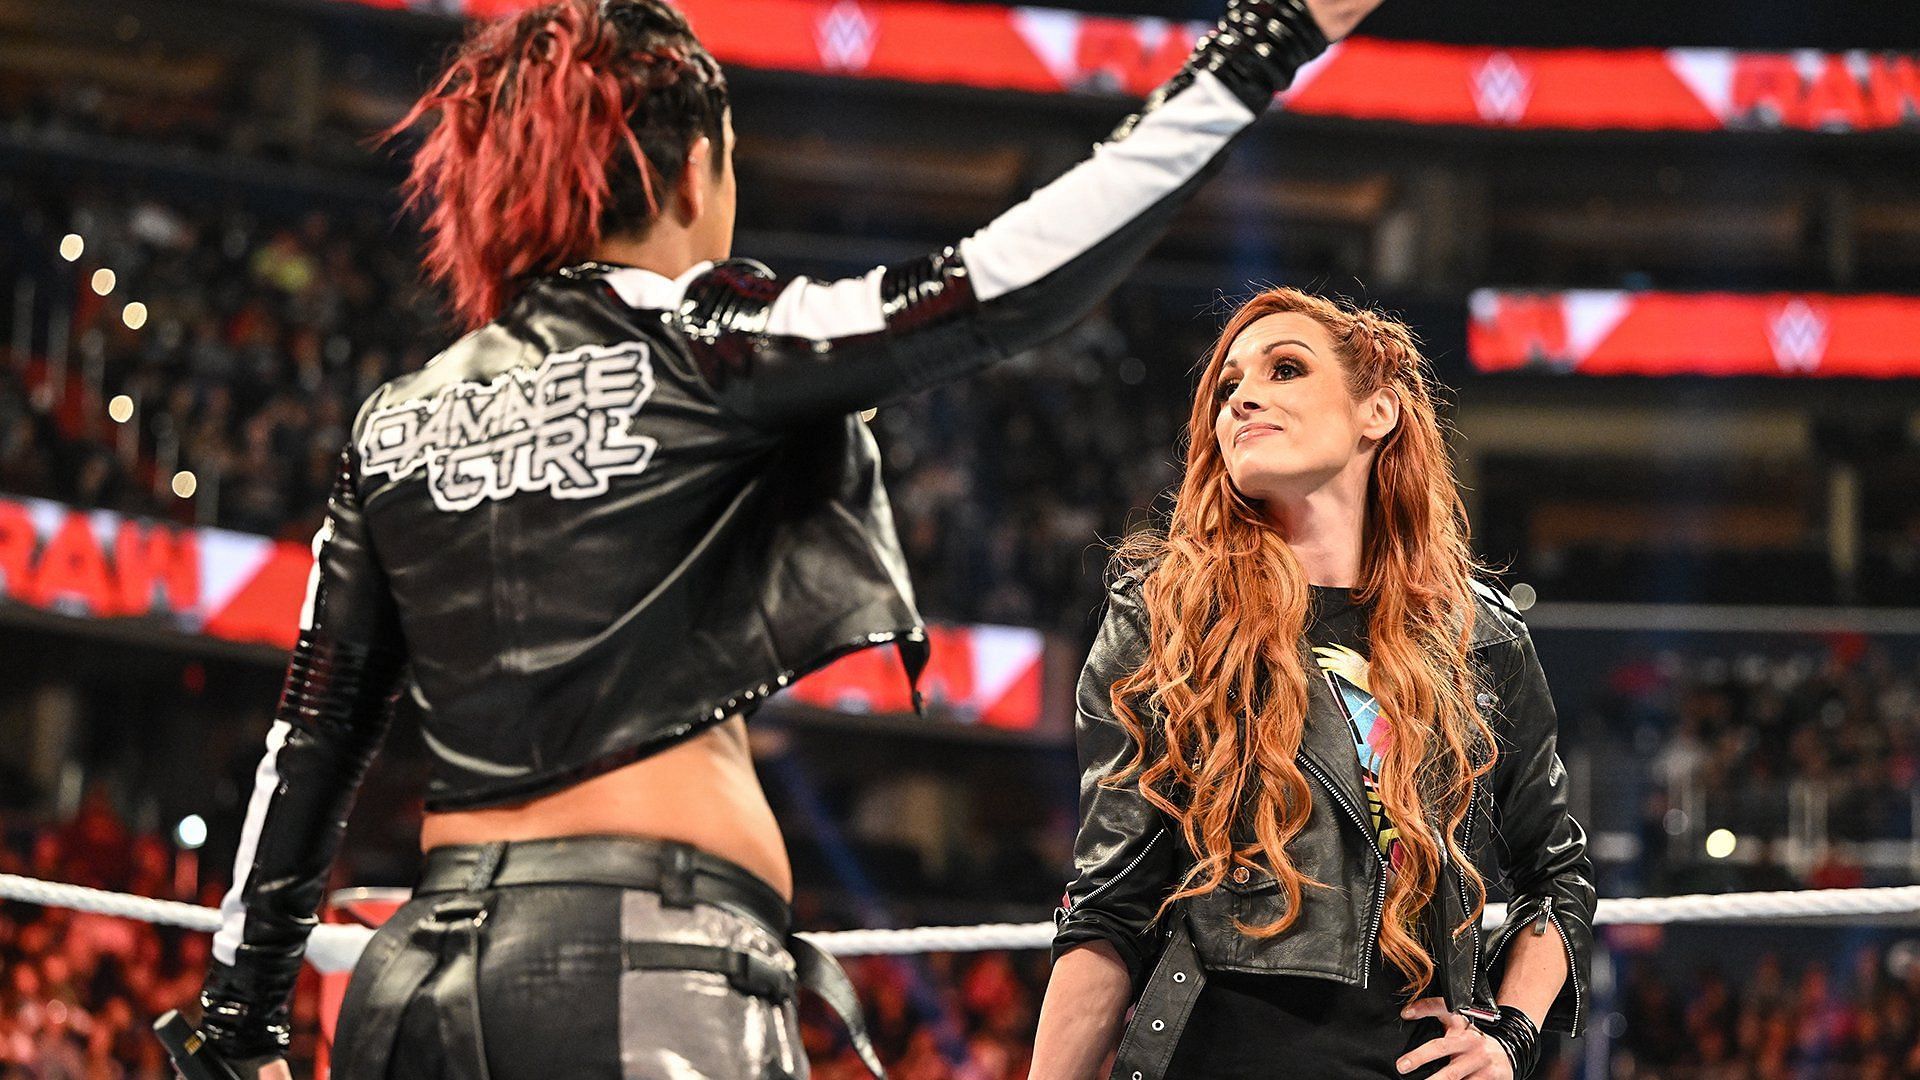 Bayley and Becky Lynch have good chemistry in the ring together